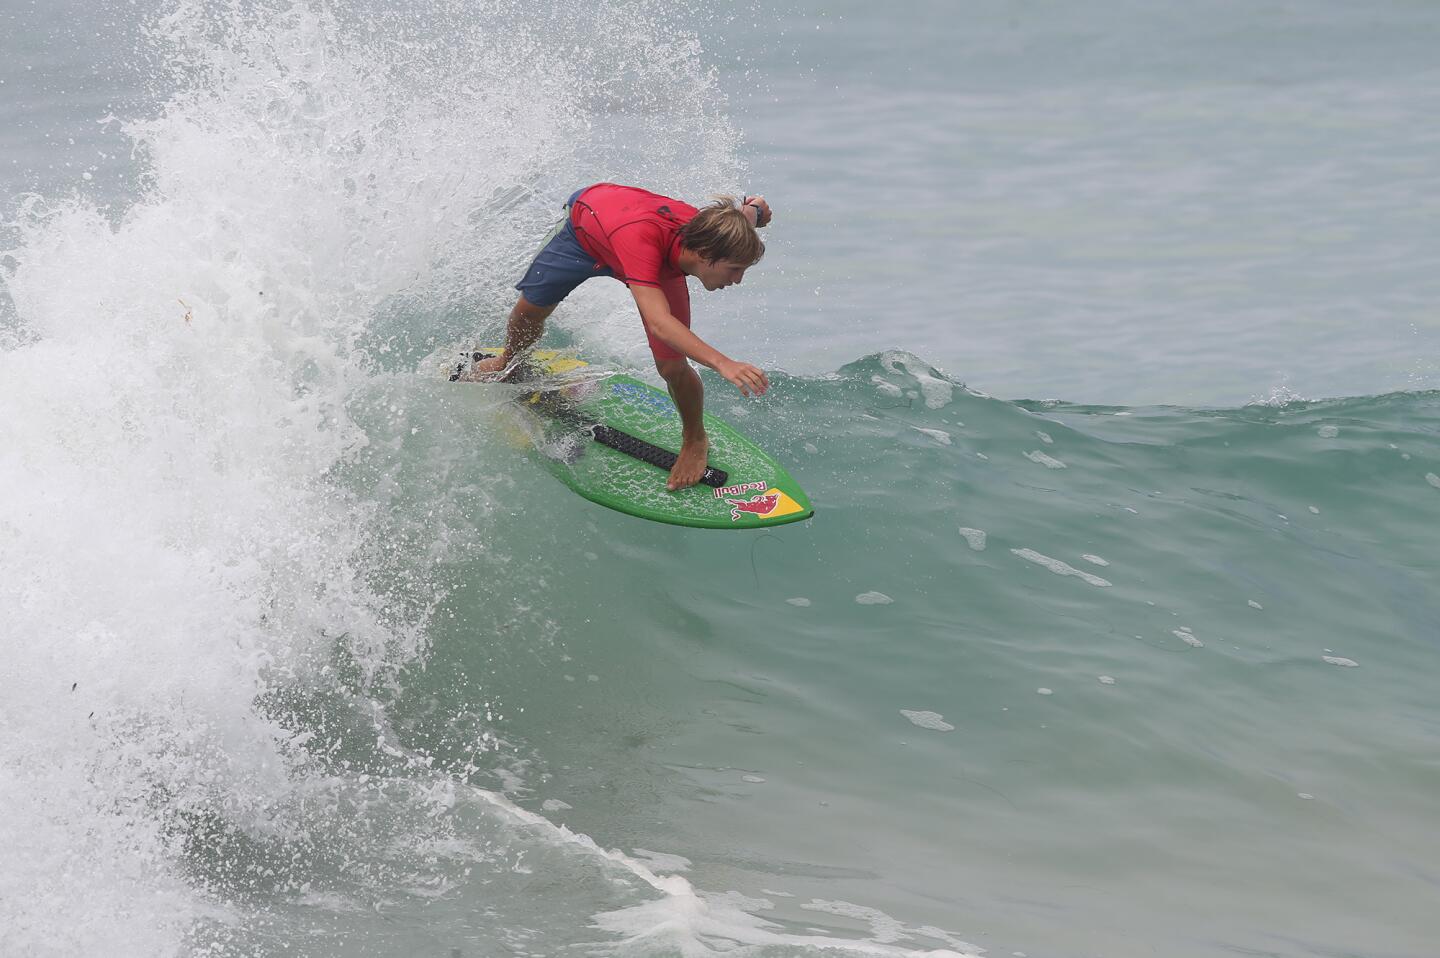 Lucas Fink carves a wall as he competes in the Pro Men division Saturday in the Victoria World Championships of Skimboarding at Aliso Beach in Laguna Beach. He ended up finishing second in the division.